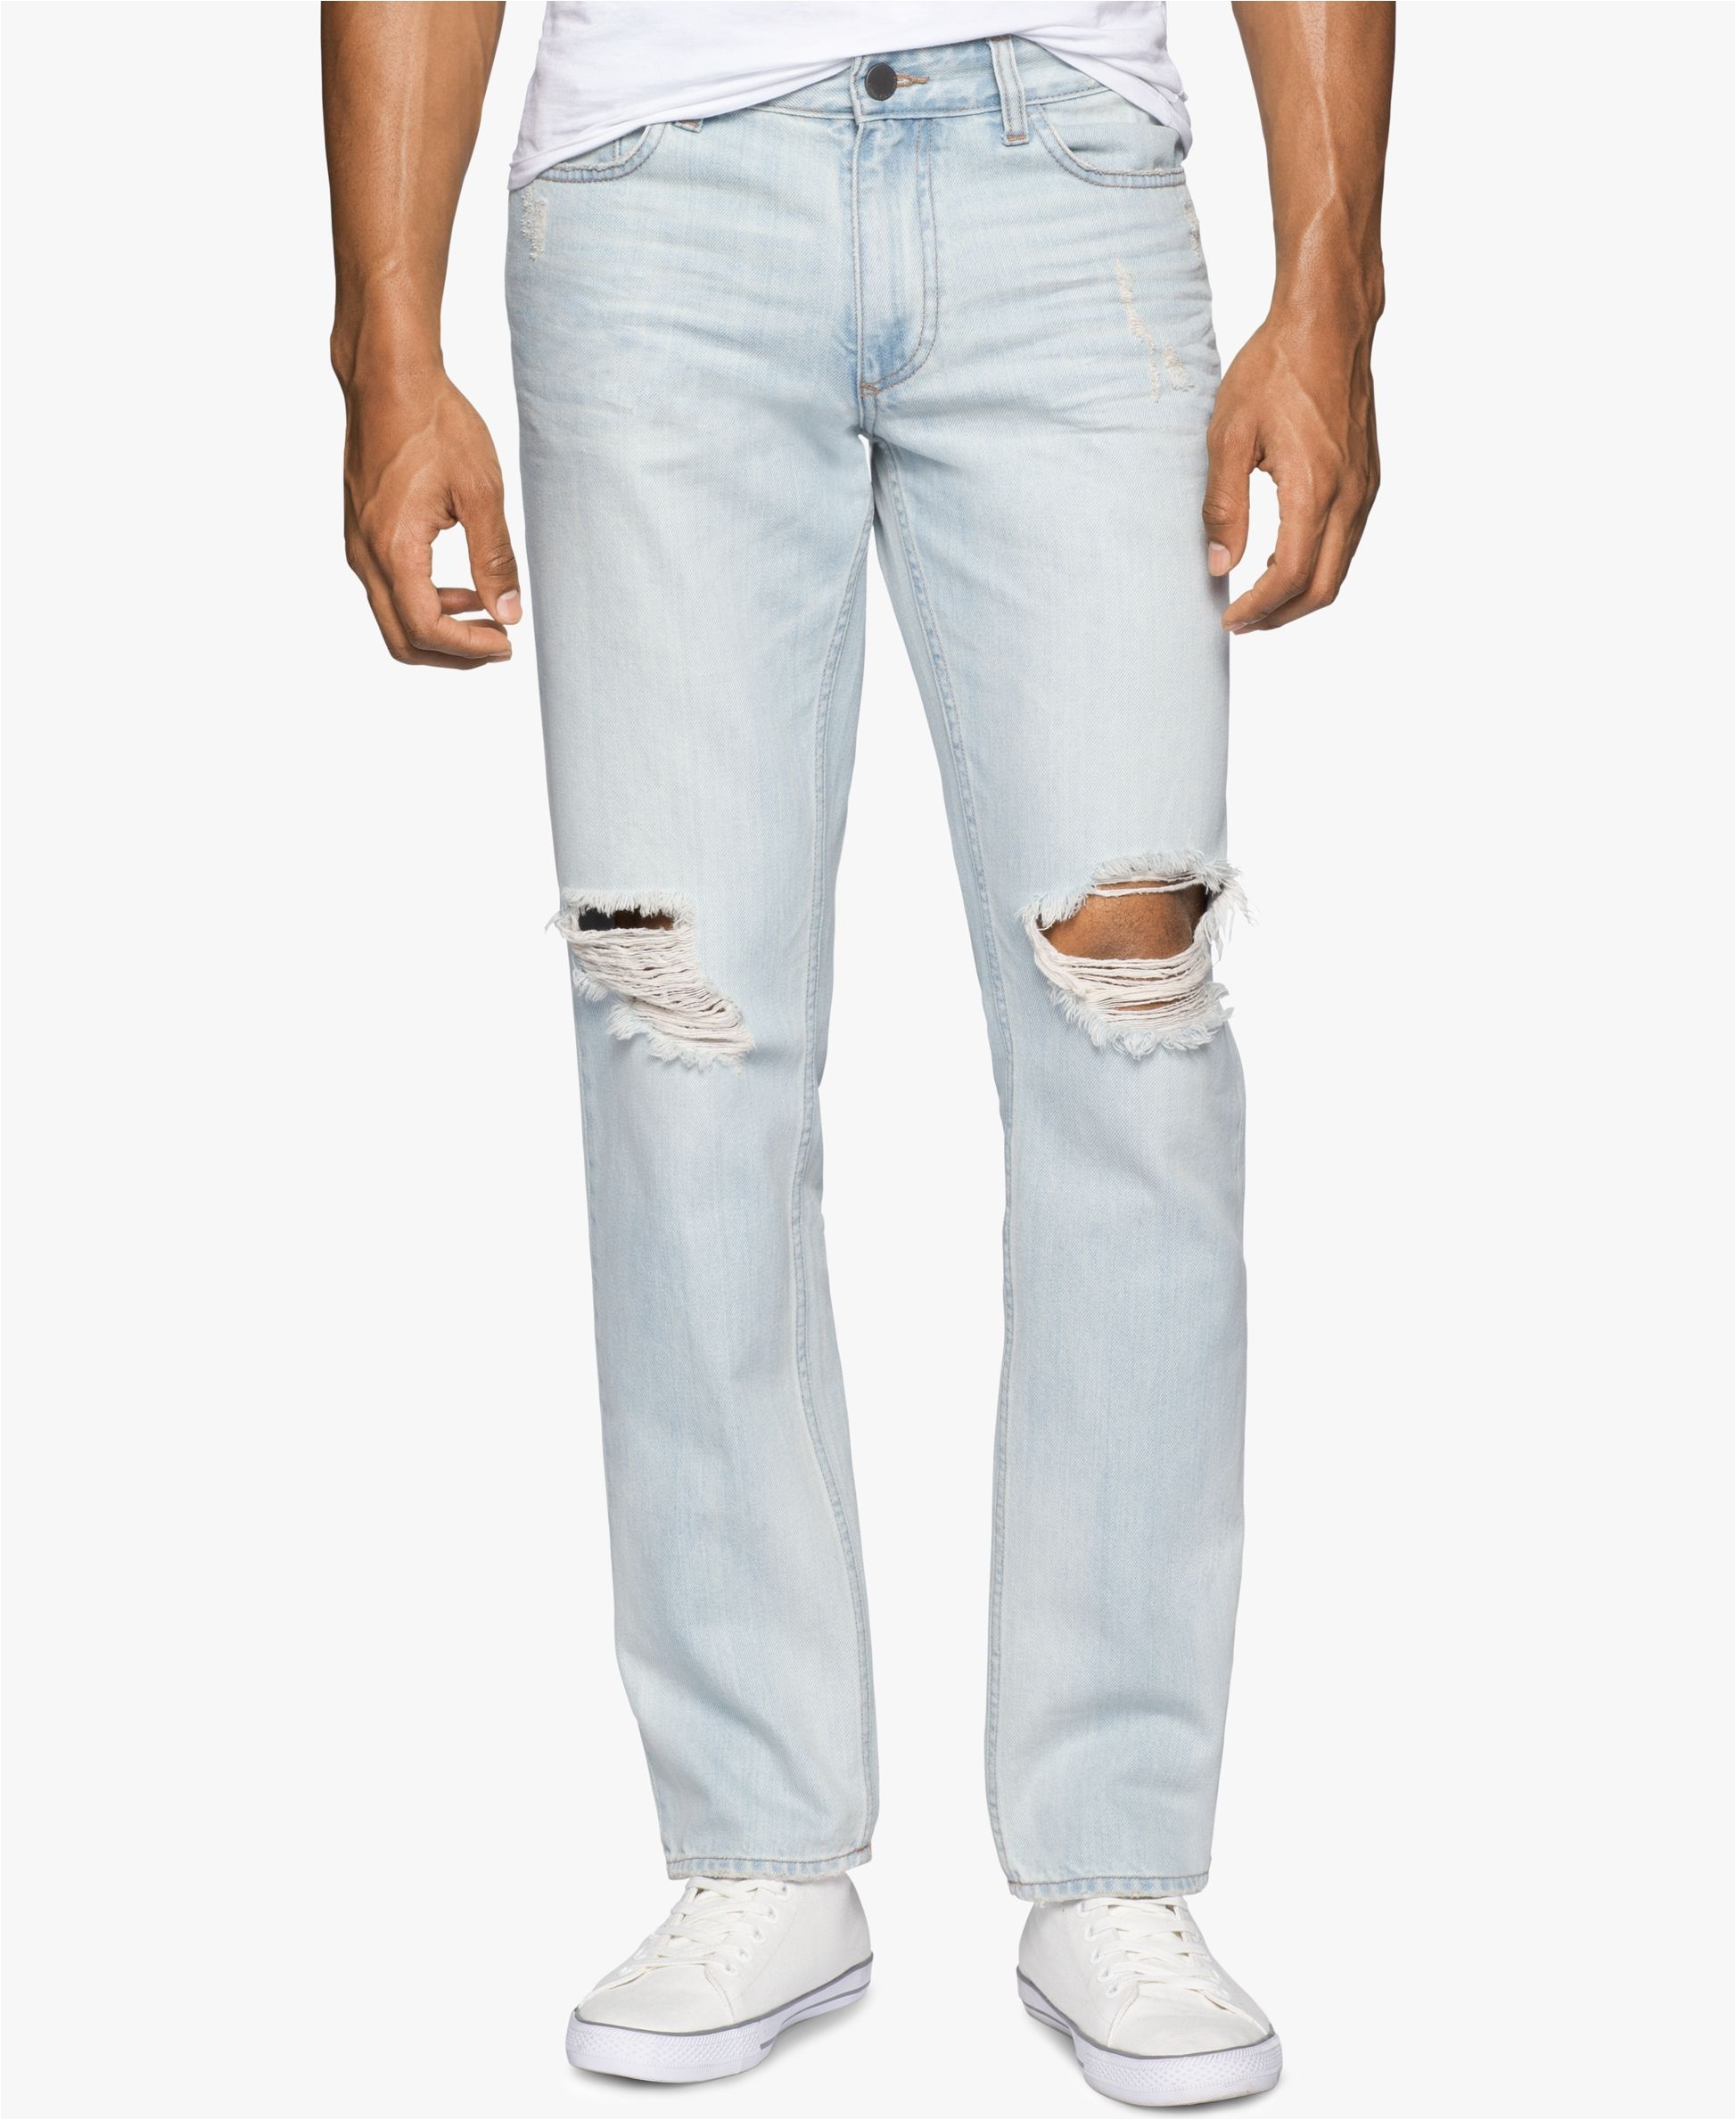 from calvin klein jeans these slim fit straight leg jeans feature faded and ripped styling in a vintage beyond blue wash